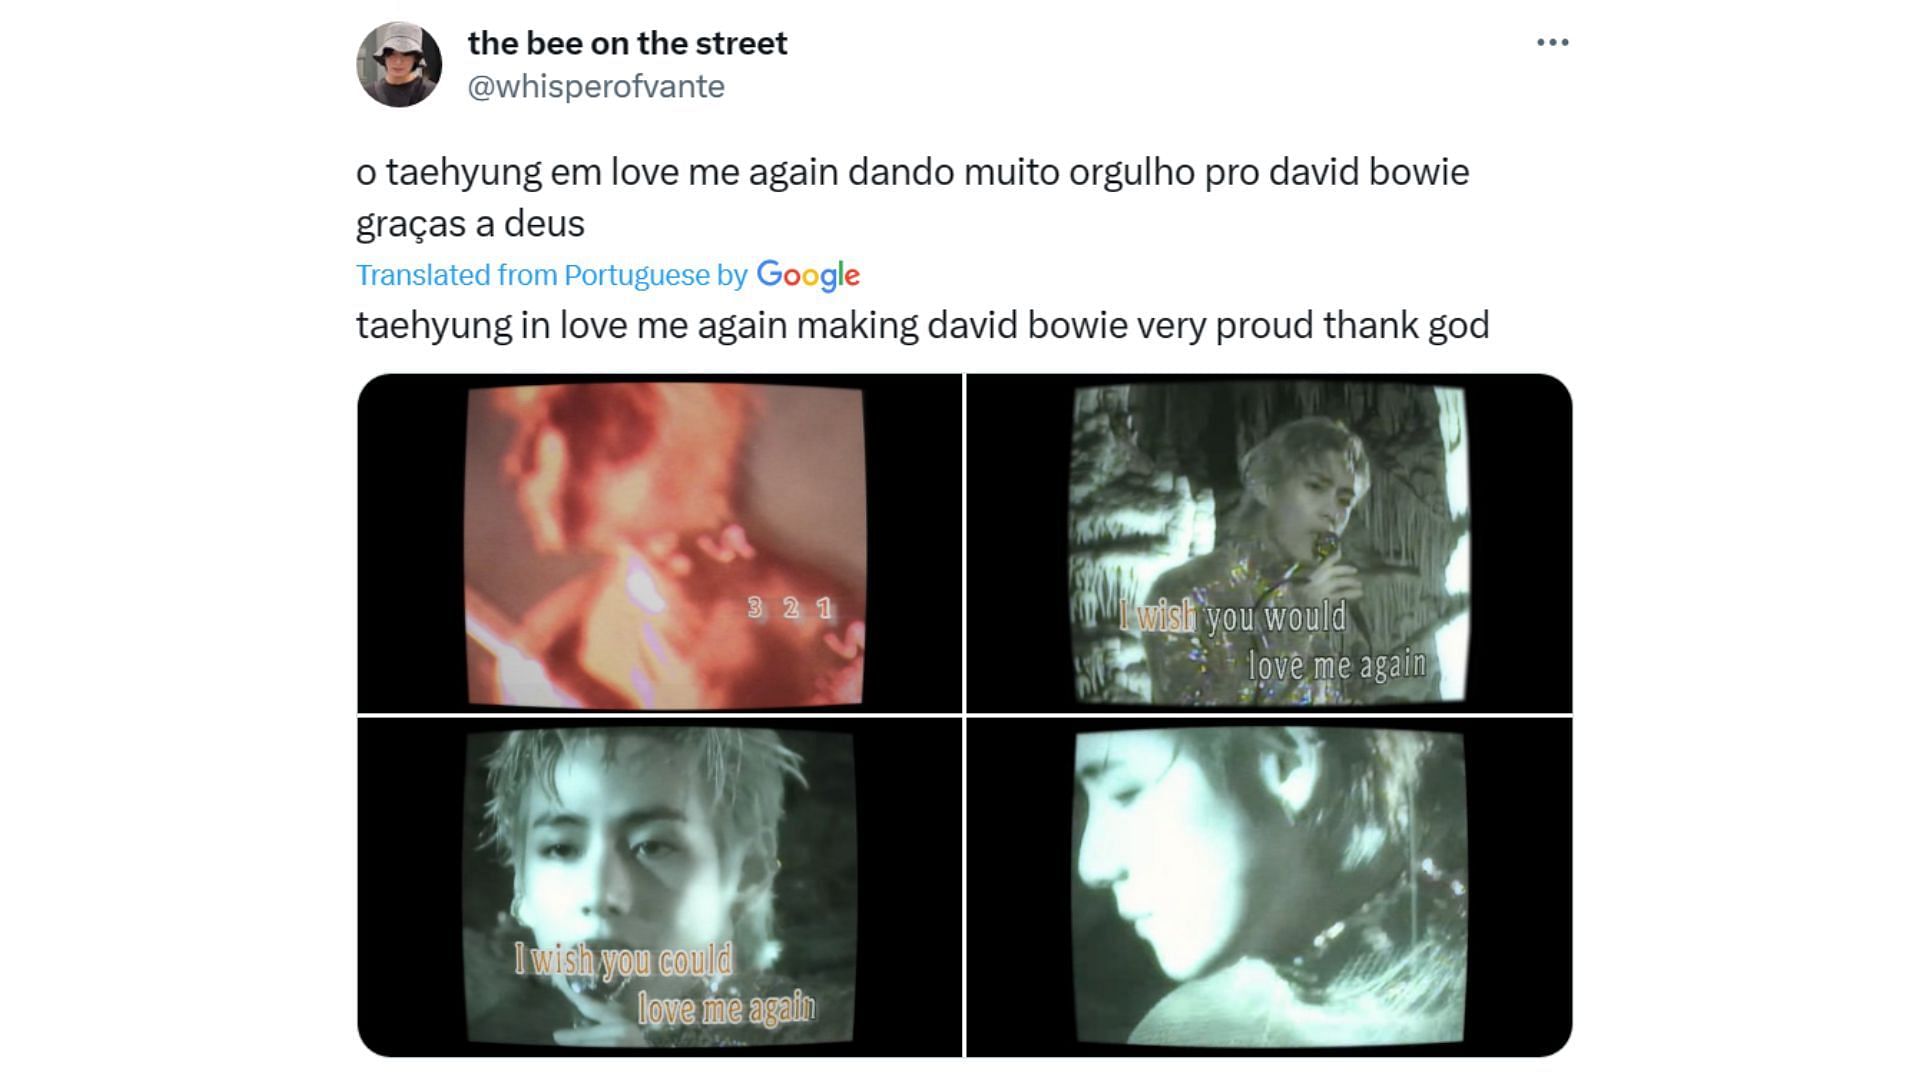 BTS&#039; V pays tribute to pop icon David Bowie in the music video. (Image via Twitter/ @whisperofvante)